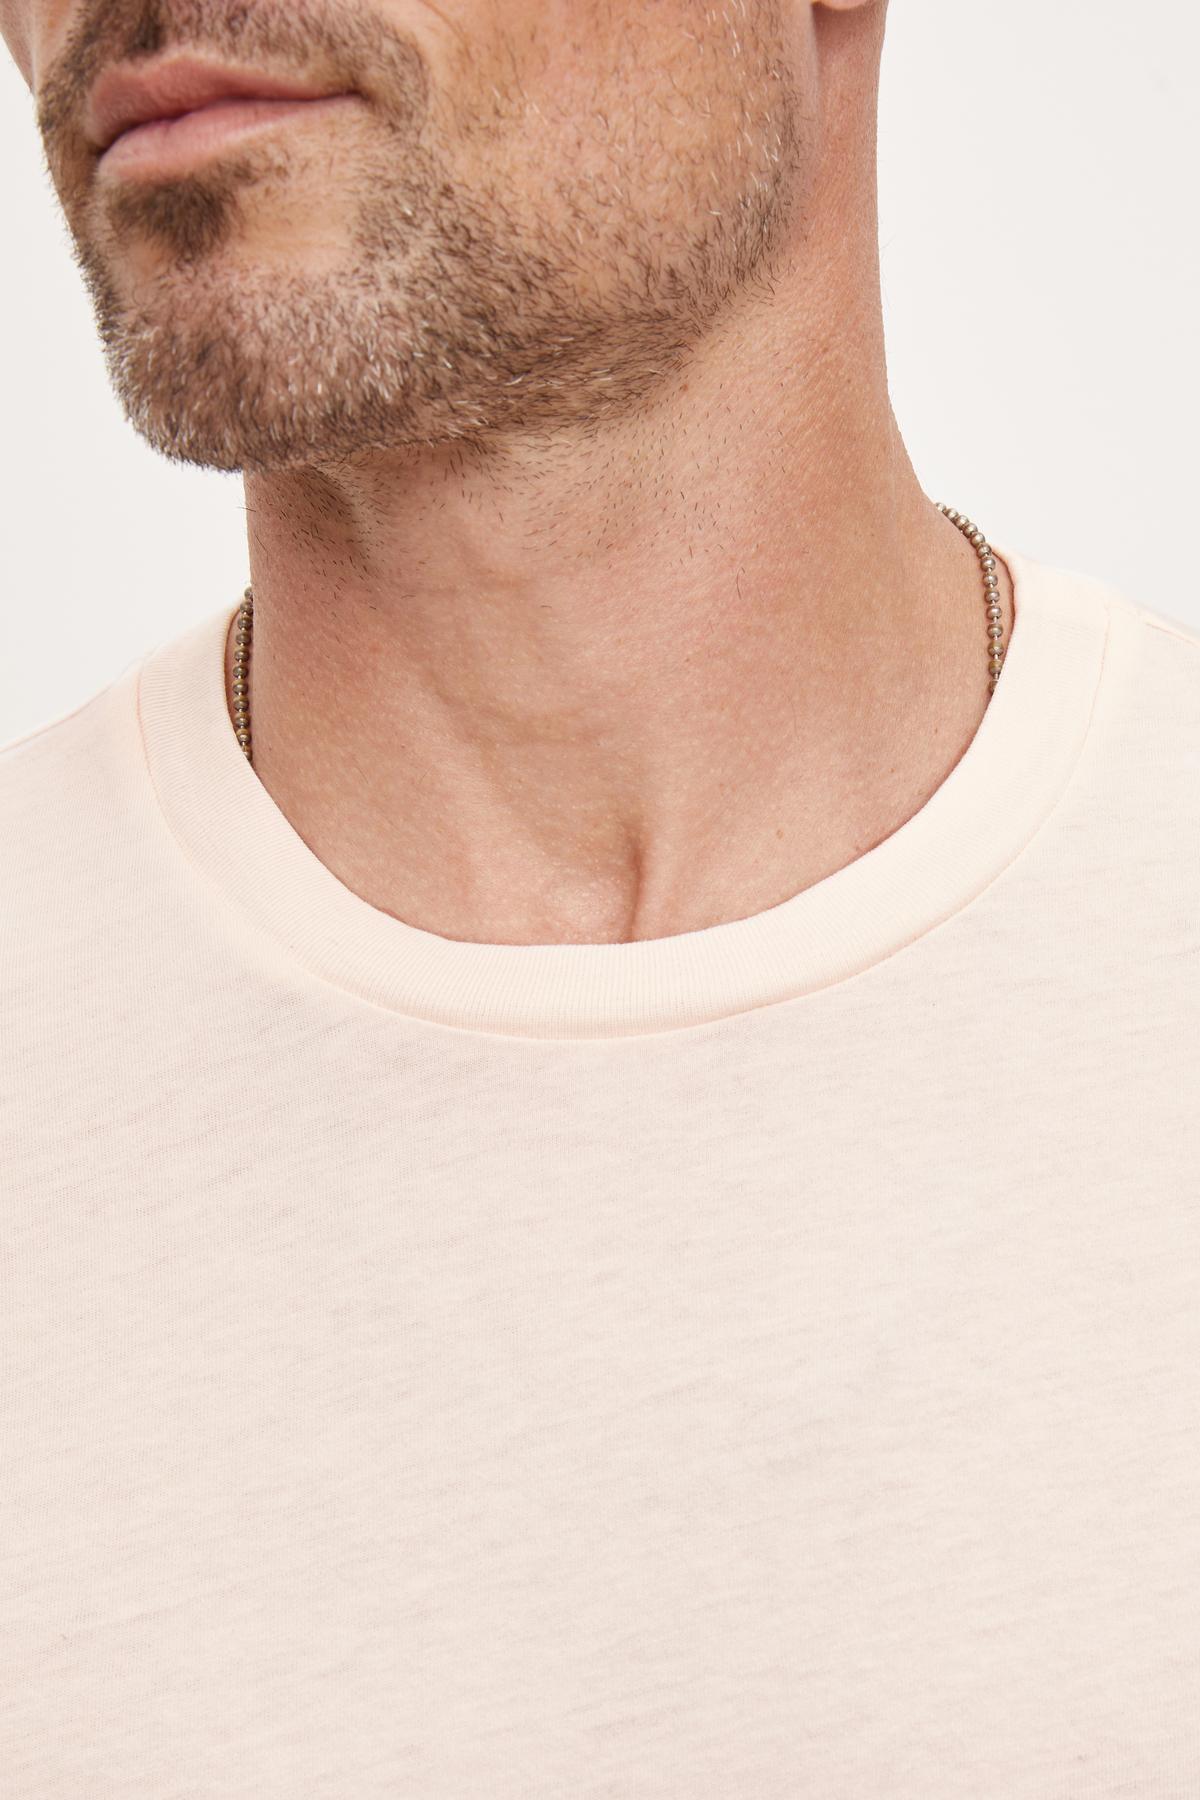   Close-up of a man wearing a Velvet by Graham & Spencer Randy Crew Neck Tee in light pink, made of 100% cotton, focusing on the neckline and the lower part of his face. 